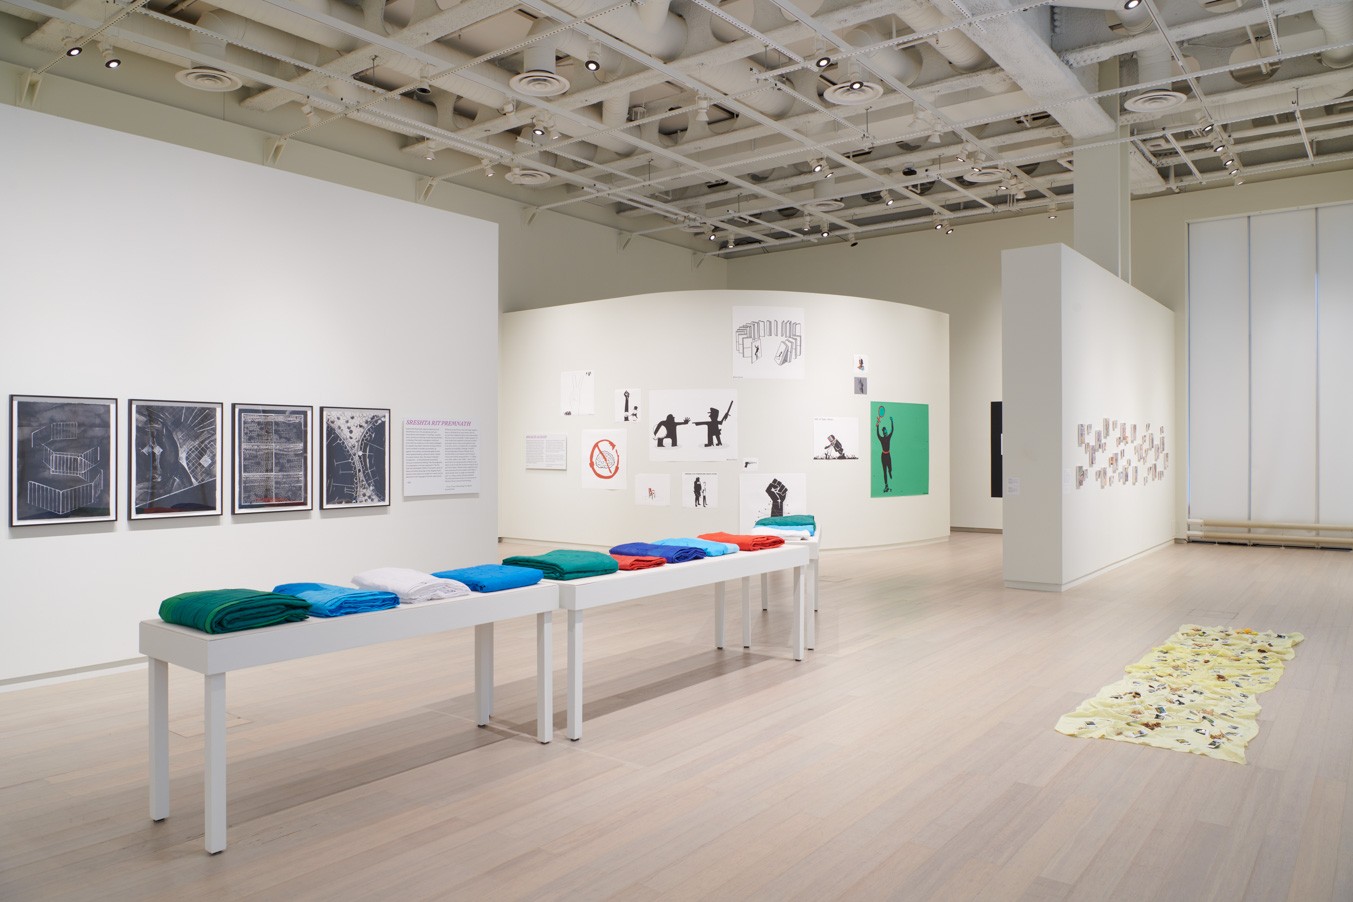 Installation view from the exhibition “The Protest and The Recuperation” on view June 12 through August 14, 2021 at the Wallach Art Gallery, Columbia University. Photograph by Kyle Knodell.